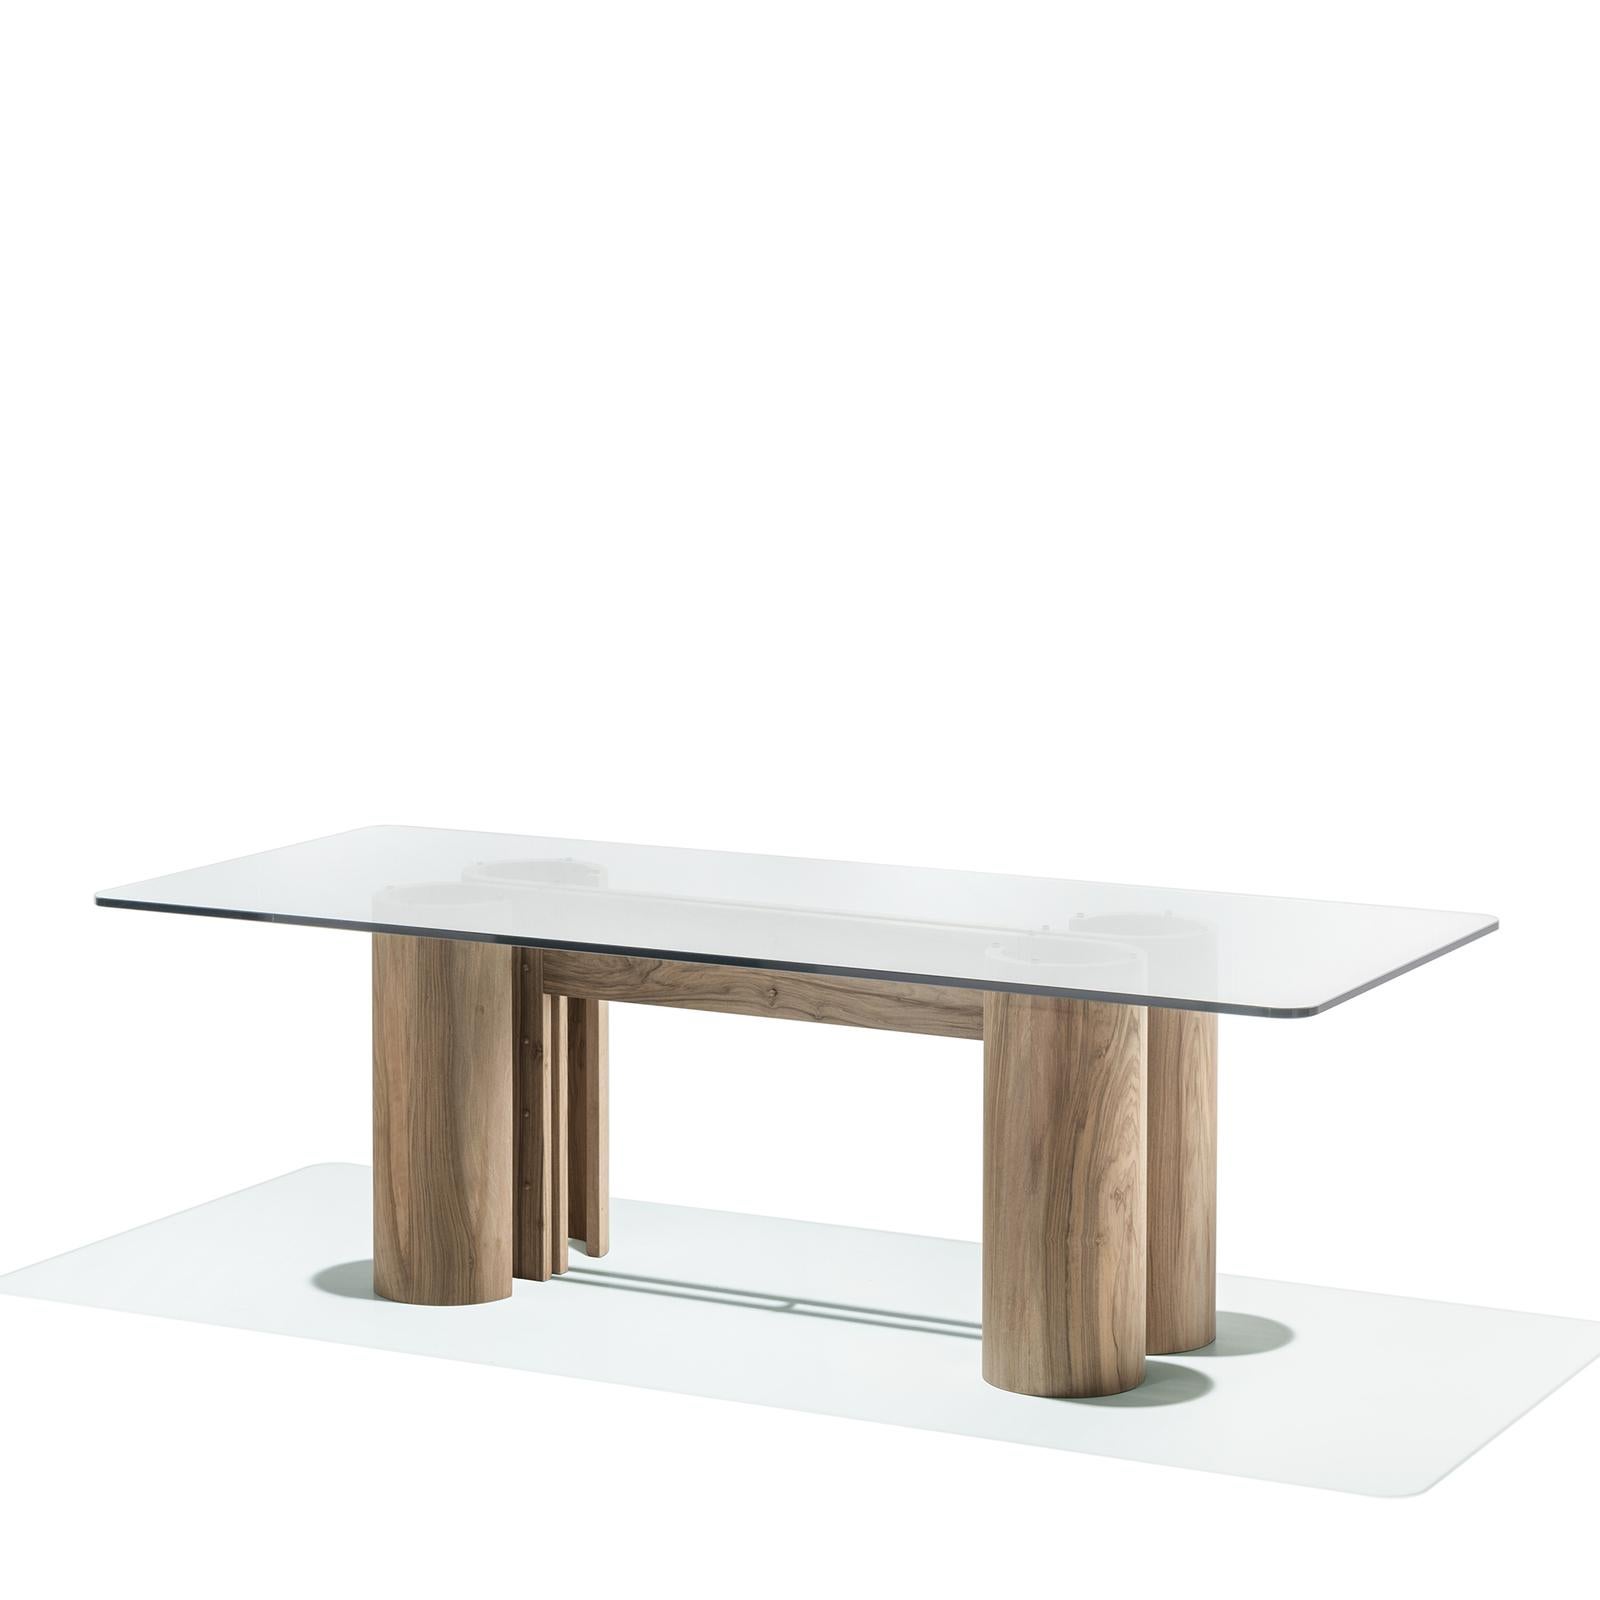 This modern table has a rectangular silhouette distinguished for its distinct architectural flair. The understated base is made of walnut and comprises four column legs with a polished finish connected at the centre by a double, U-shaped element.